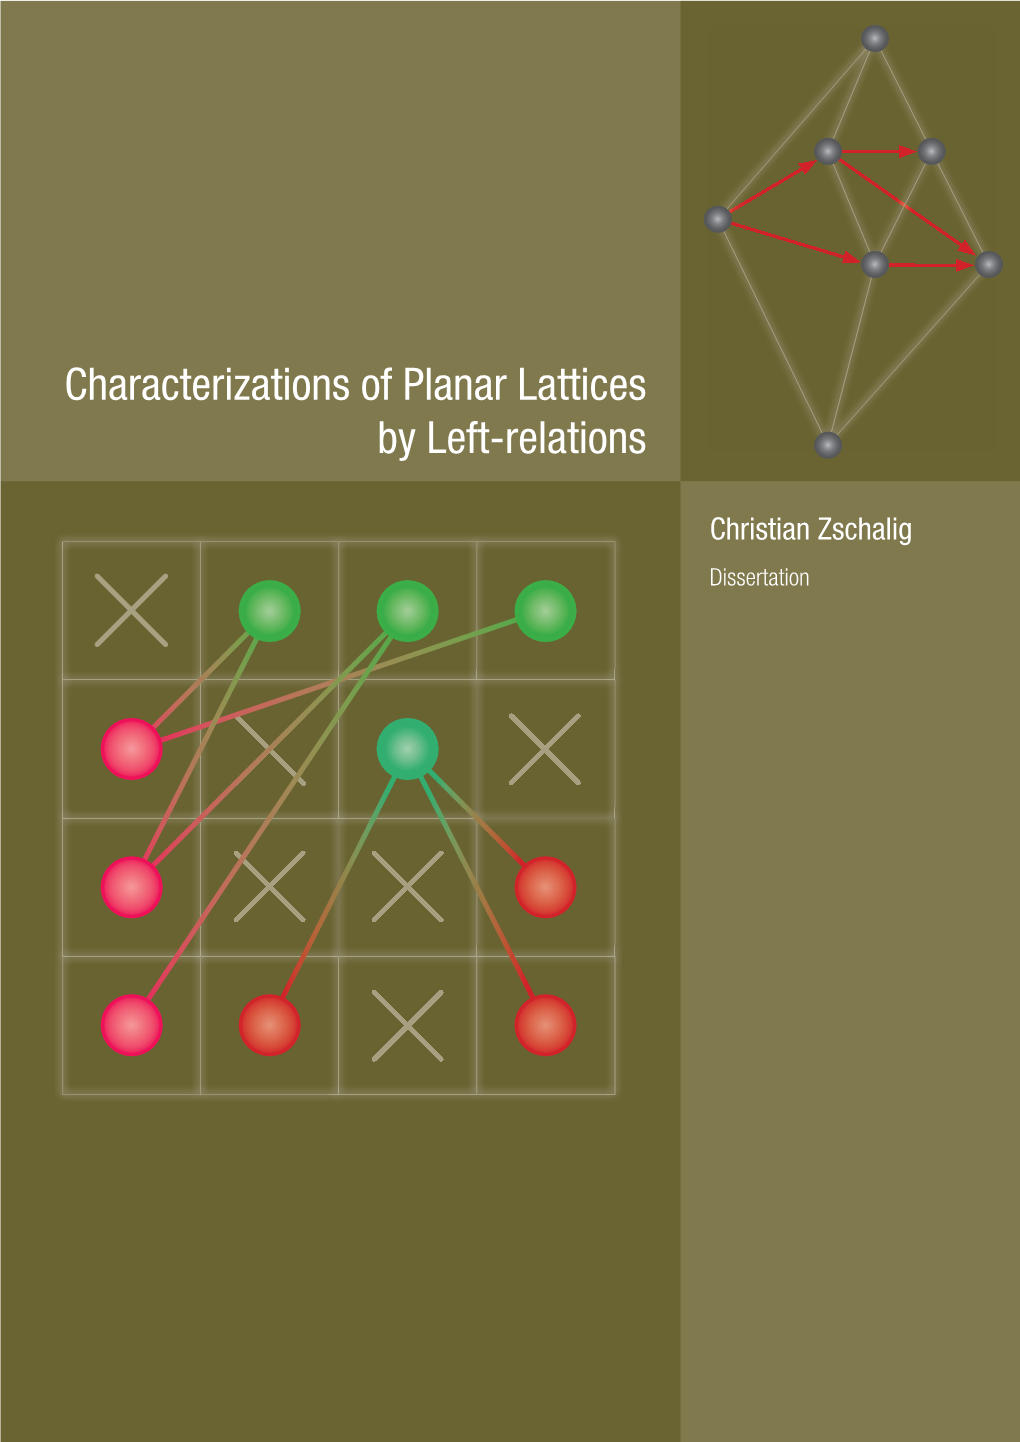 Characterizations of Planar Lattices by Left-Relations